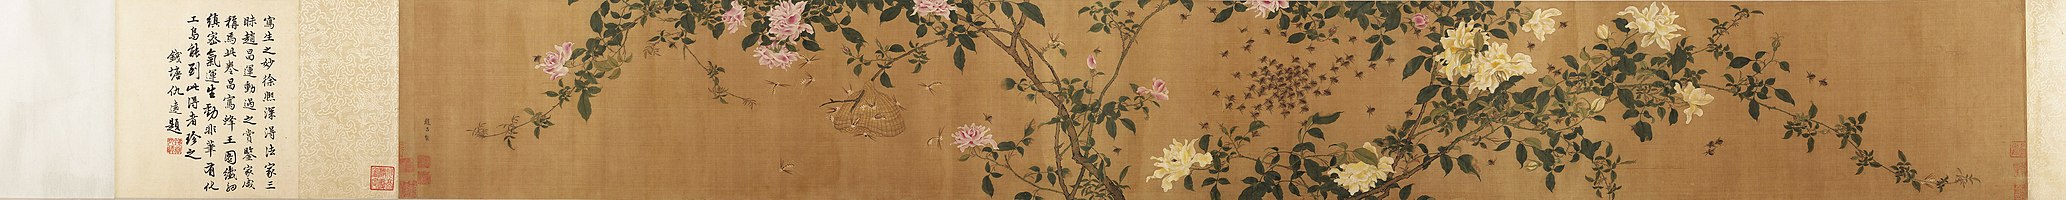 Zhao Chang - Yellow Roses and Bees, Pink Roses and Wasps.jpg